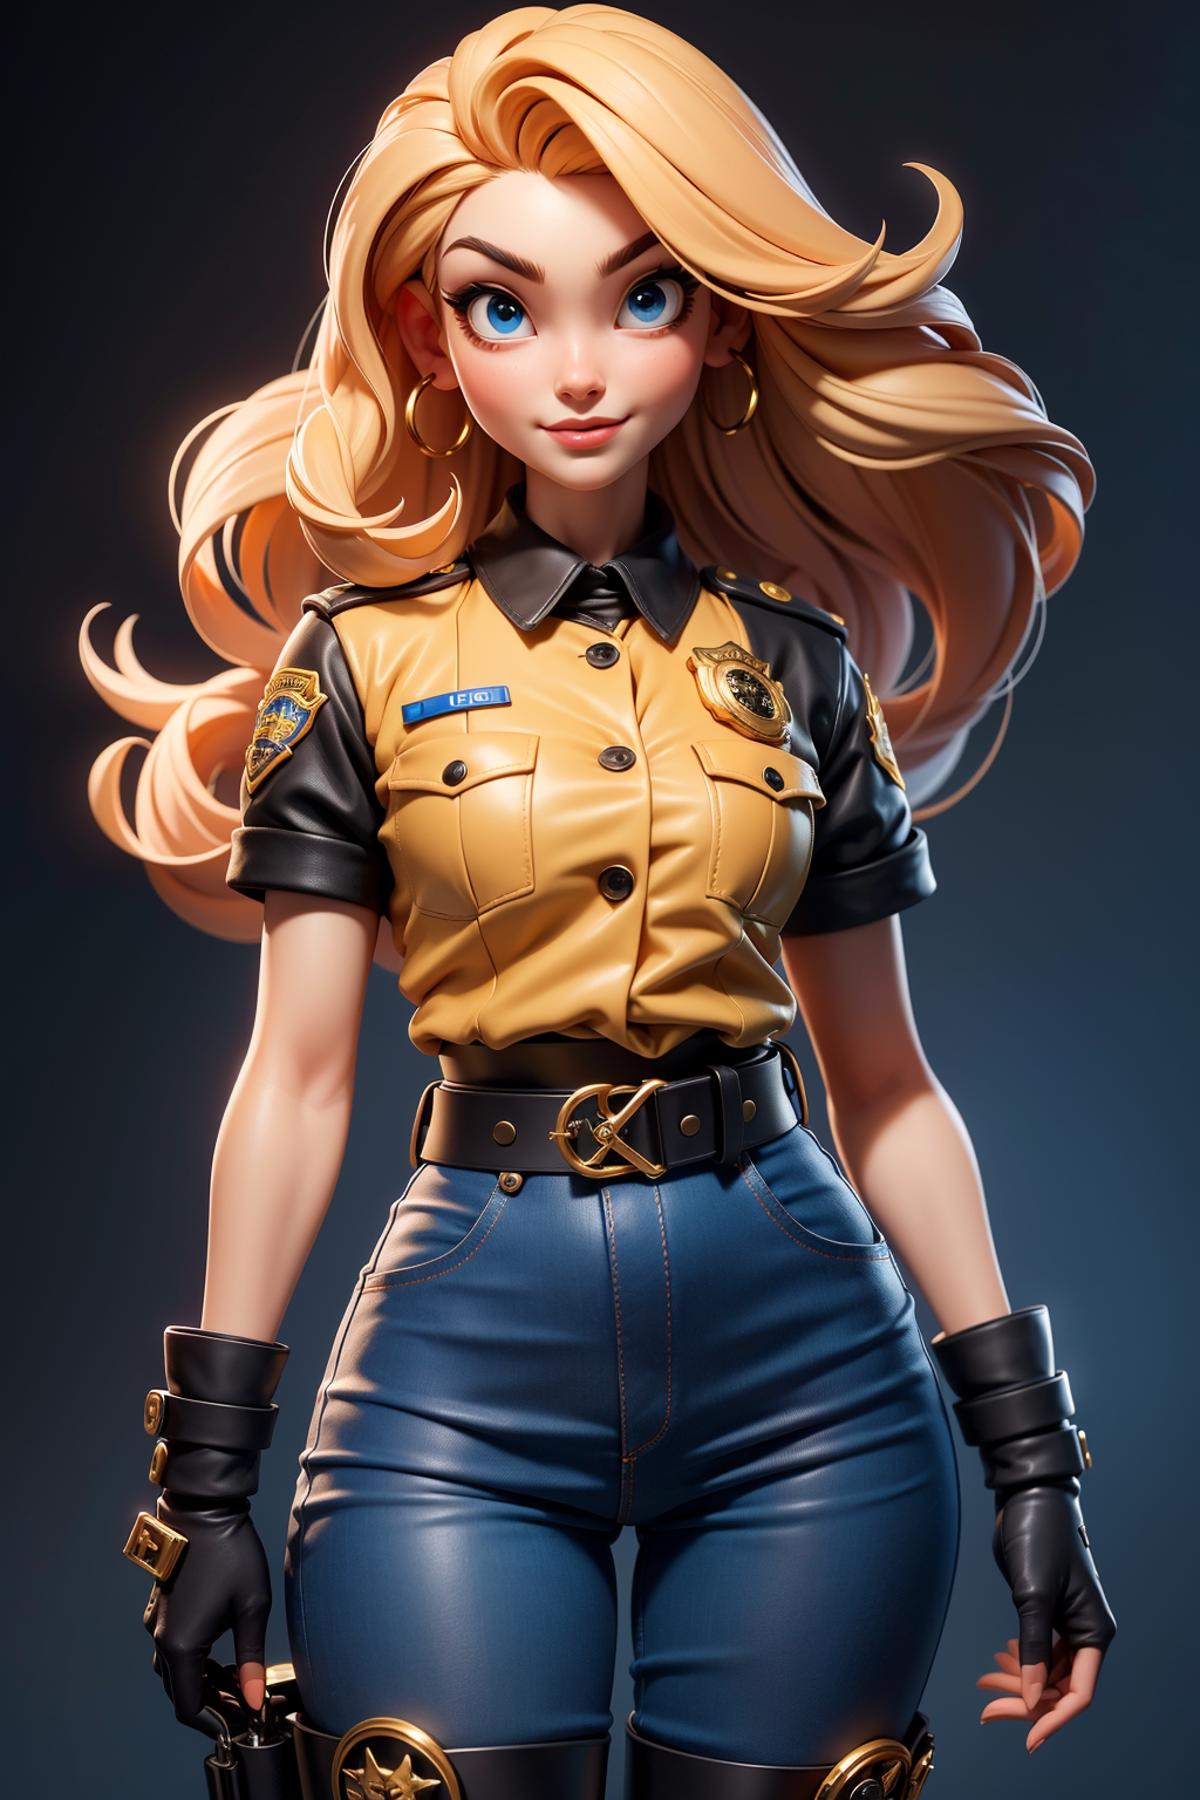 A 3D model of a woman wearing a yellow police jacket, blue jeans, and black boots.